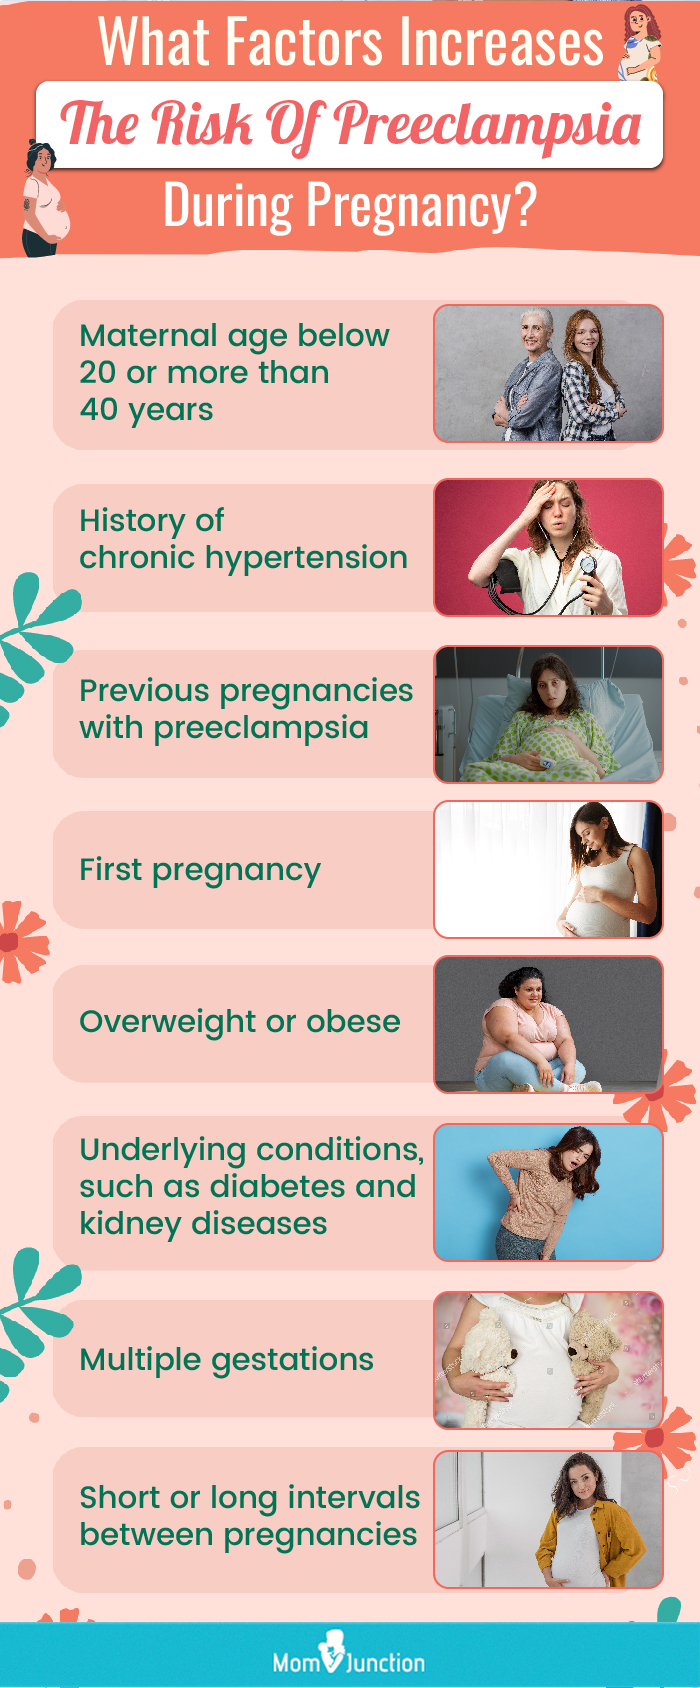 what factors increases the risk of preeclampsia during pregnancy? (infographic)